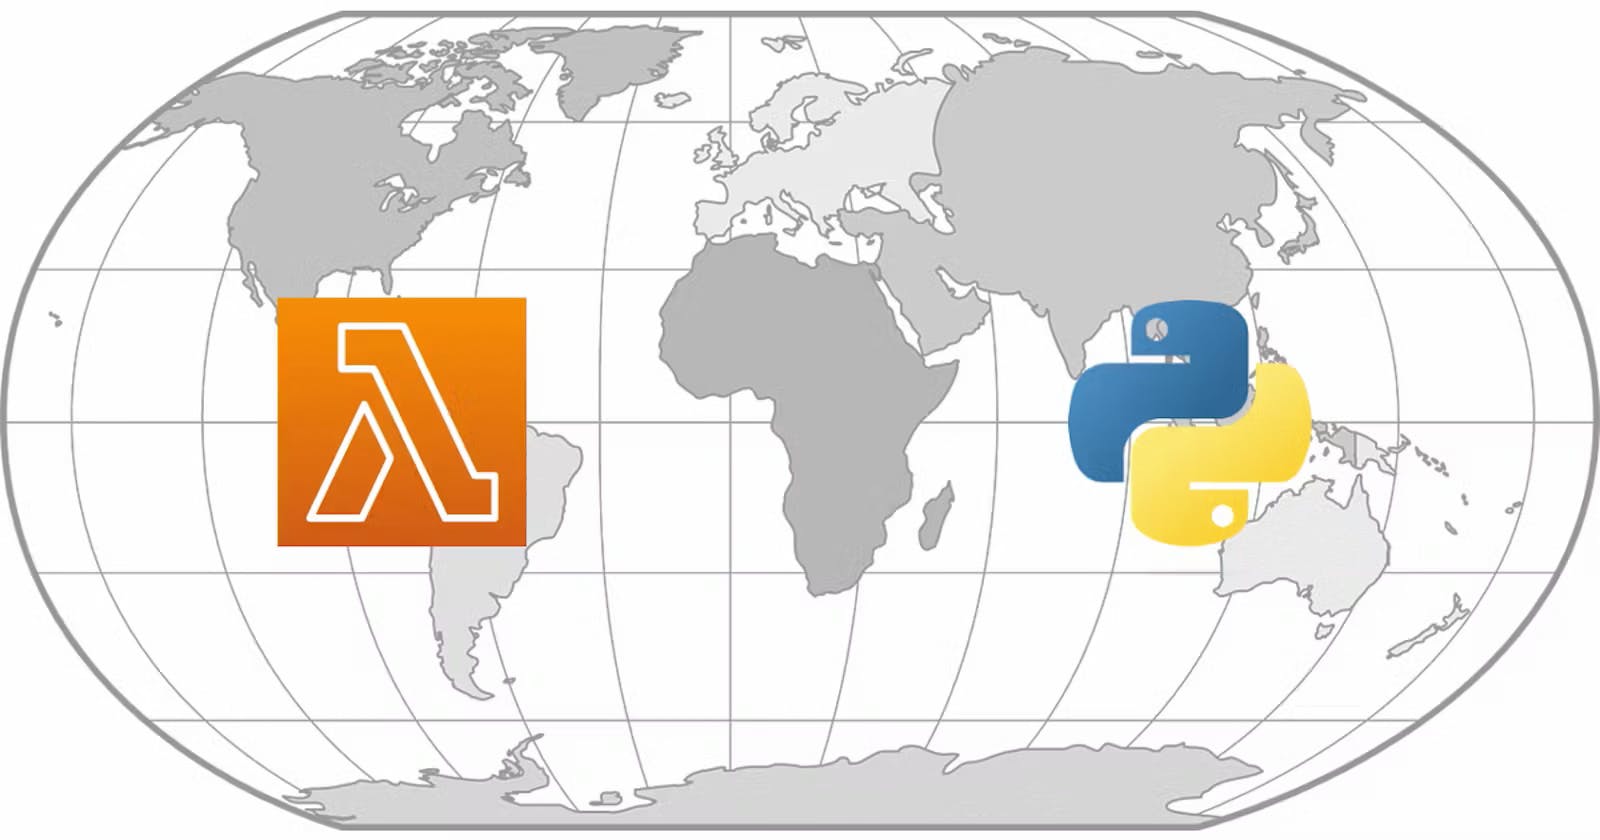 Working With Time Zones in an AWS Lambda Python Function